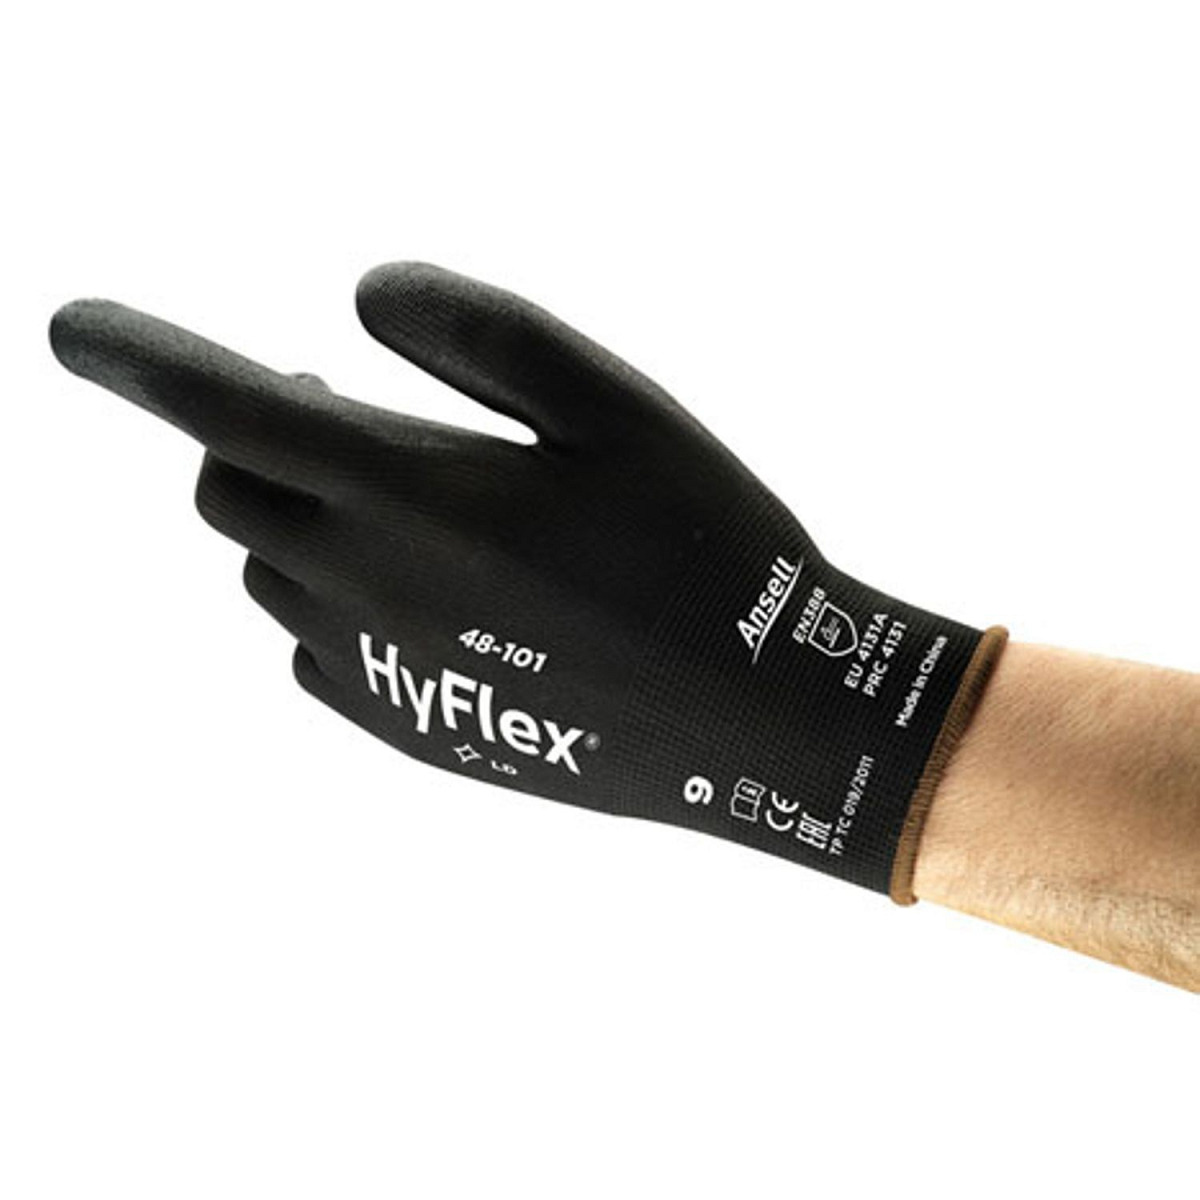 1 ANSELL 12 PAIRS OF HYFLEX FINGER COATED GLOVES SIZE 9 